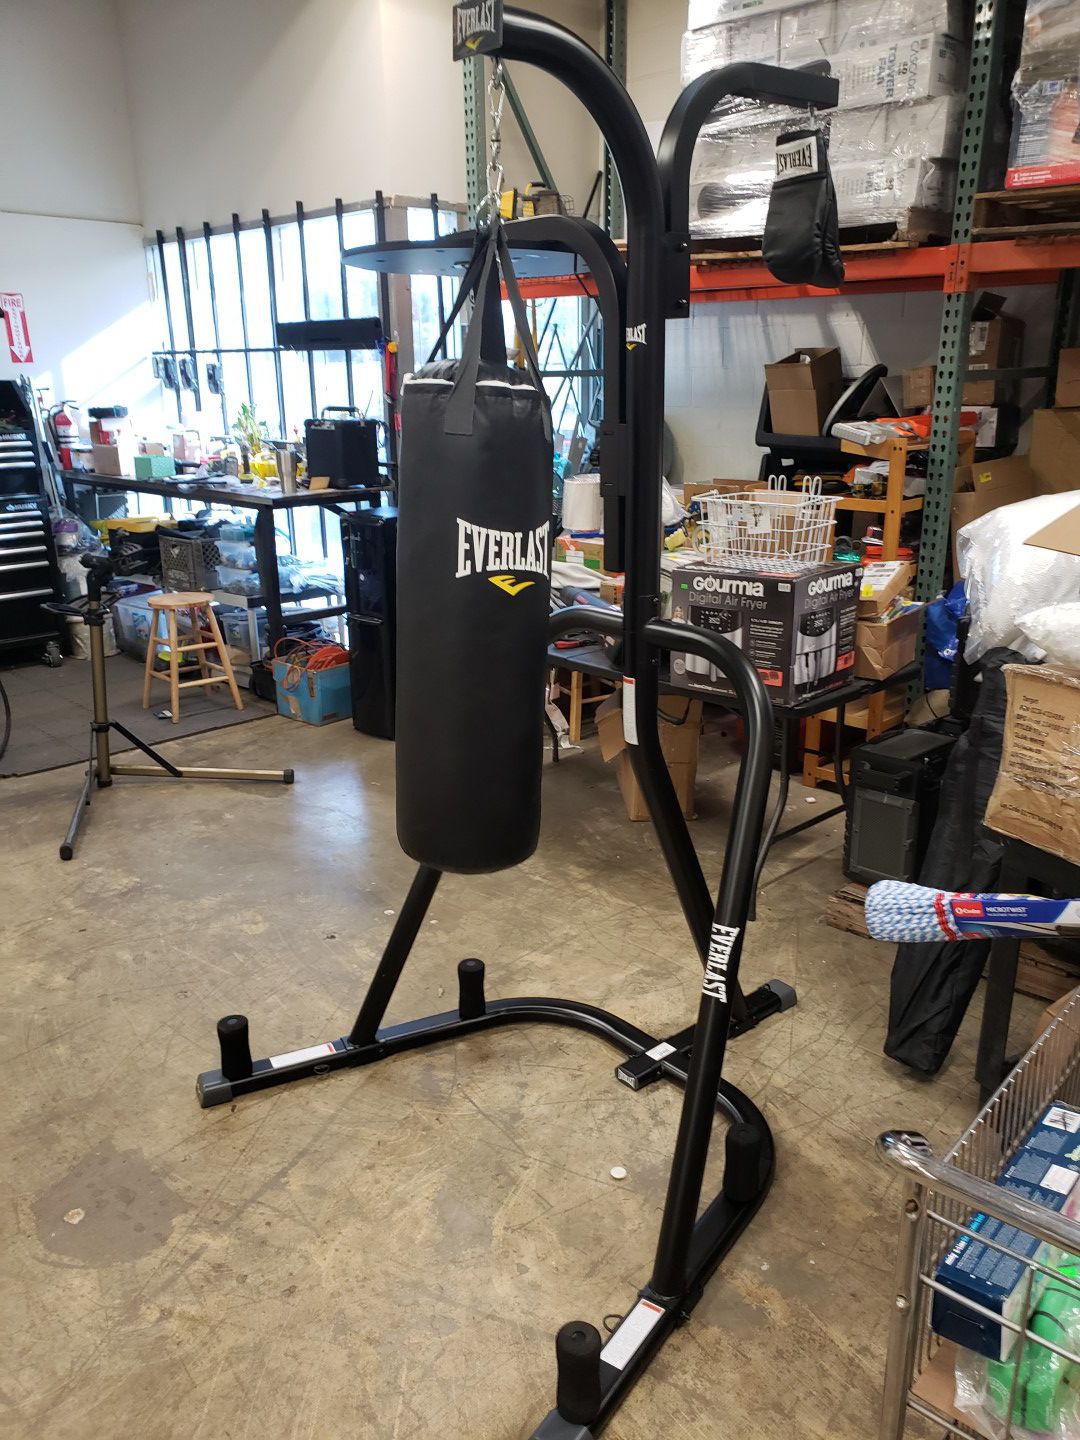 Everlast bag stand with 70 pound bag. Has spot for speed bag and double end striking bag. Comes with gloves. $200 YOU WILL NEED A TRUCK FOR PICK UP